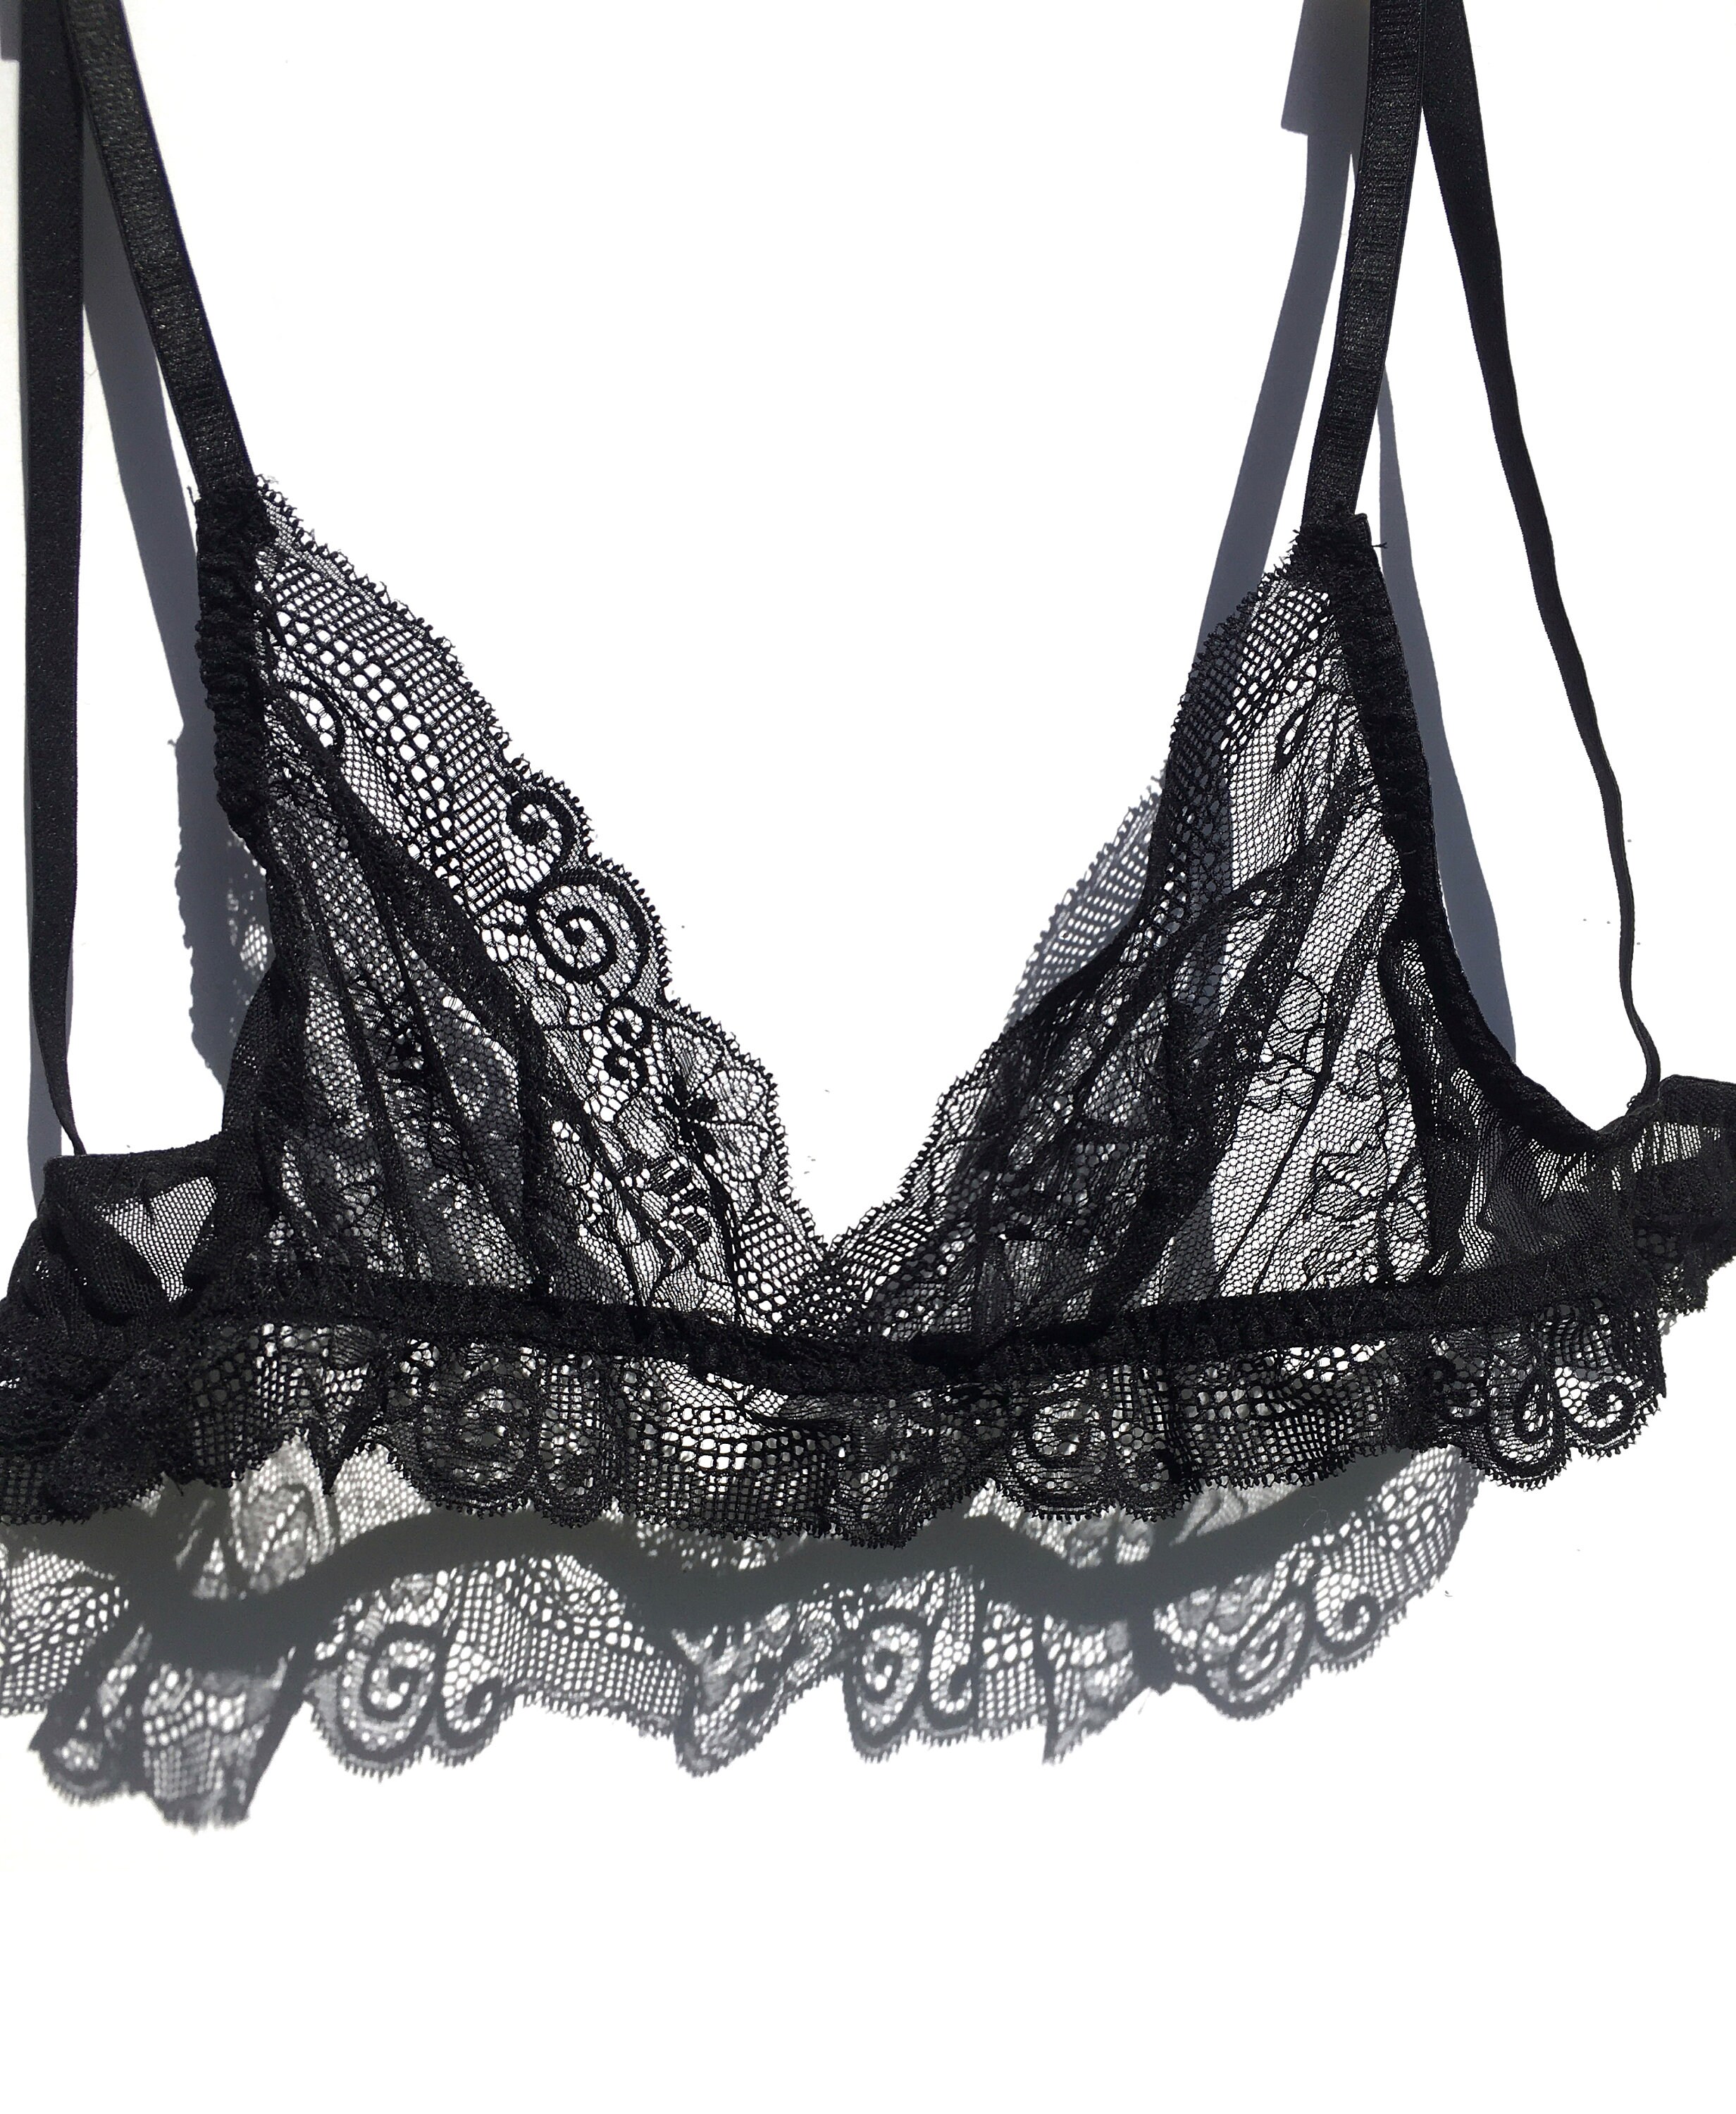 Cacique NWT Stretch Lace Bralette With Wide Elastic Band Black Size XS -  $36 (58% Off Retail) New With Tags - From Remington